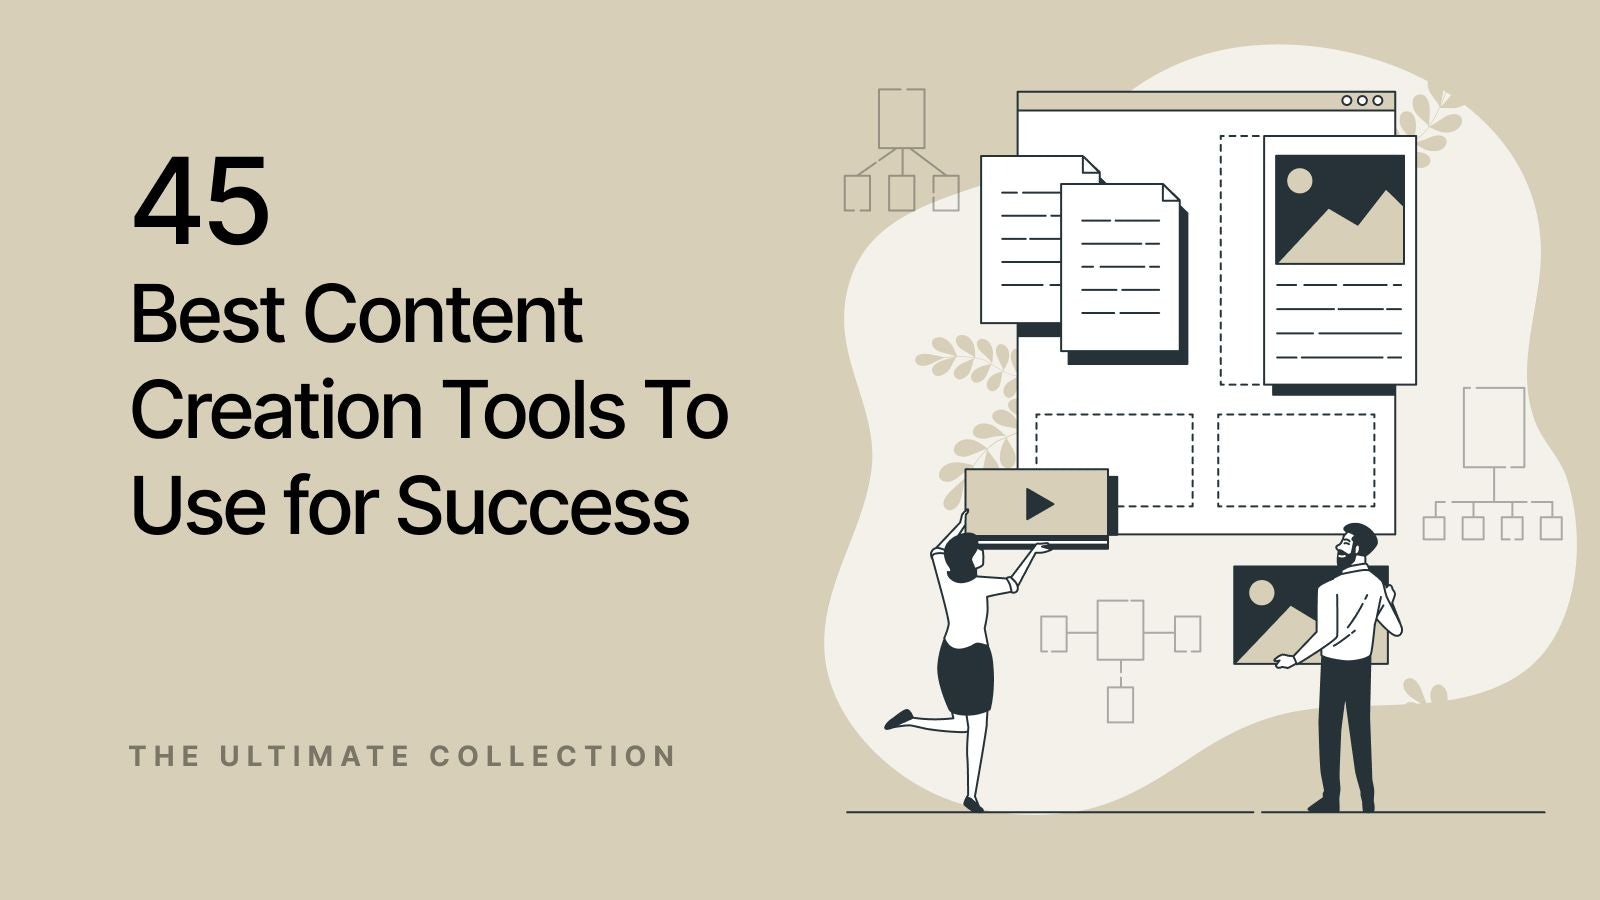 Best Content Creation Tools